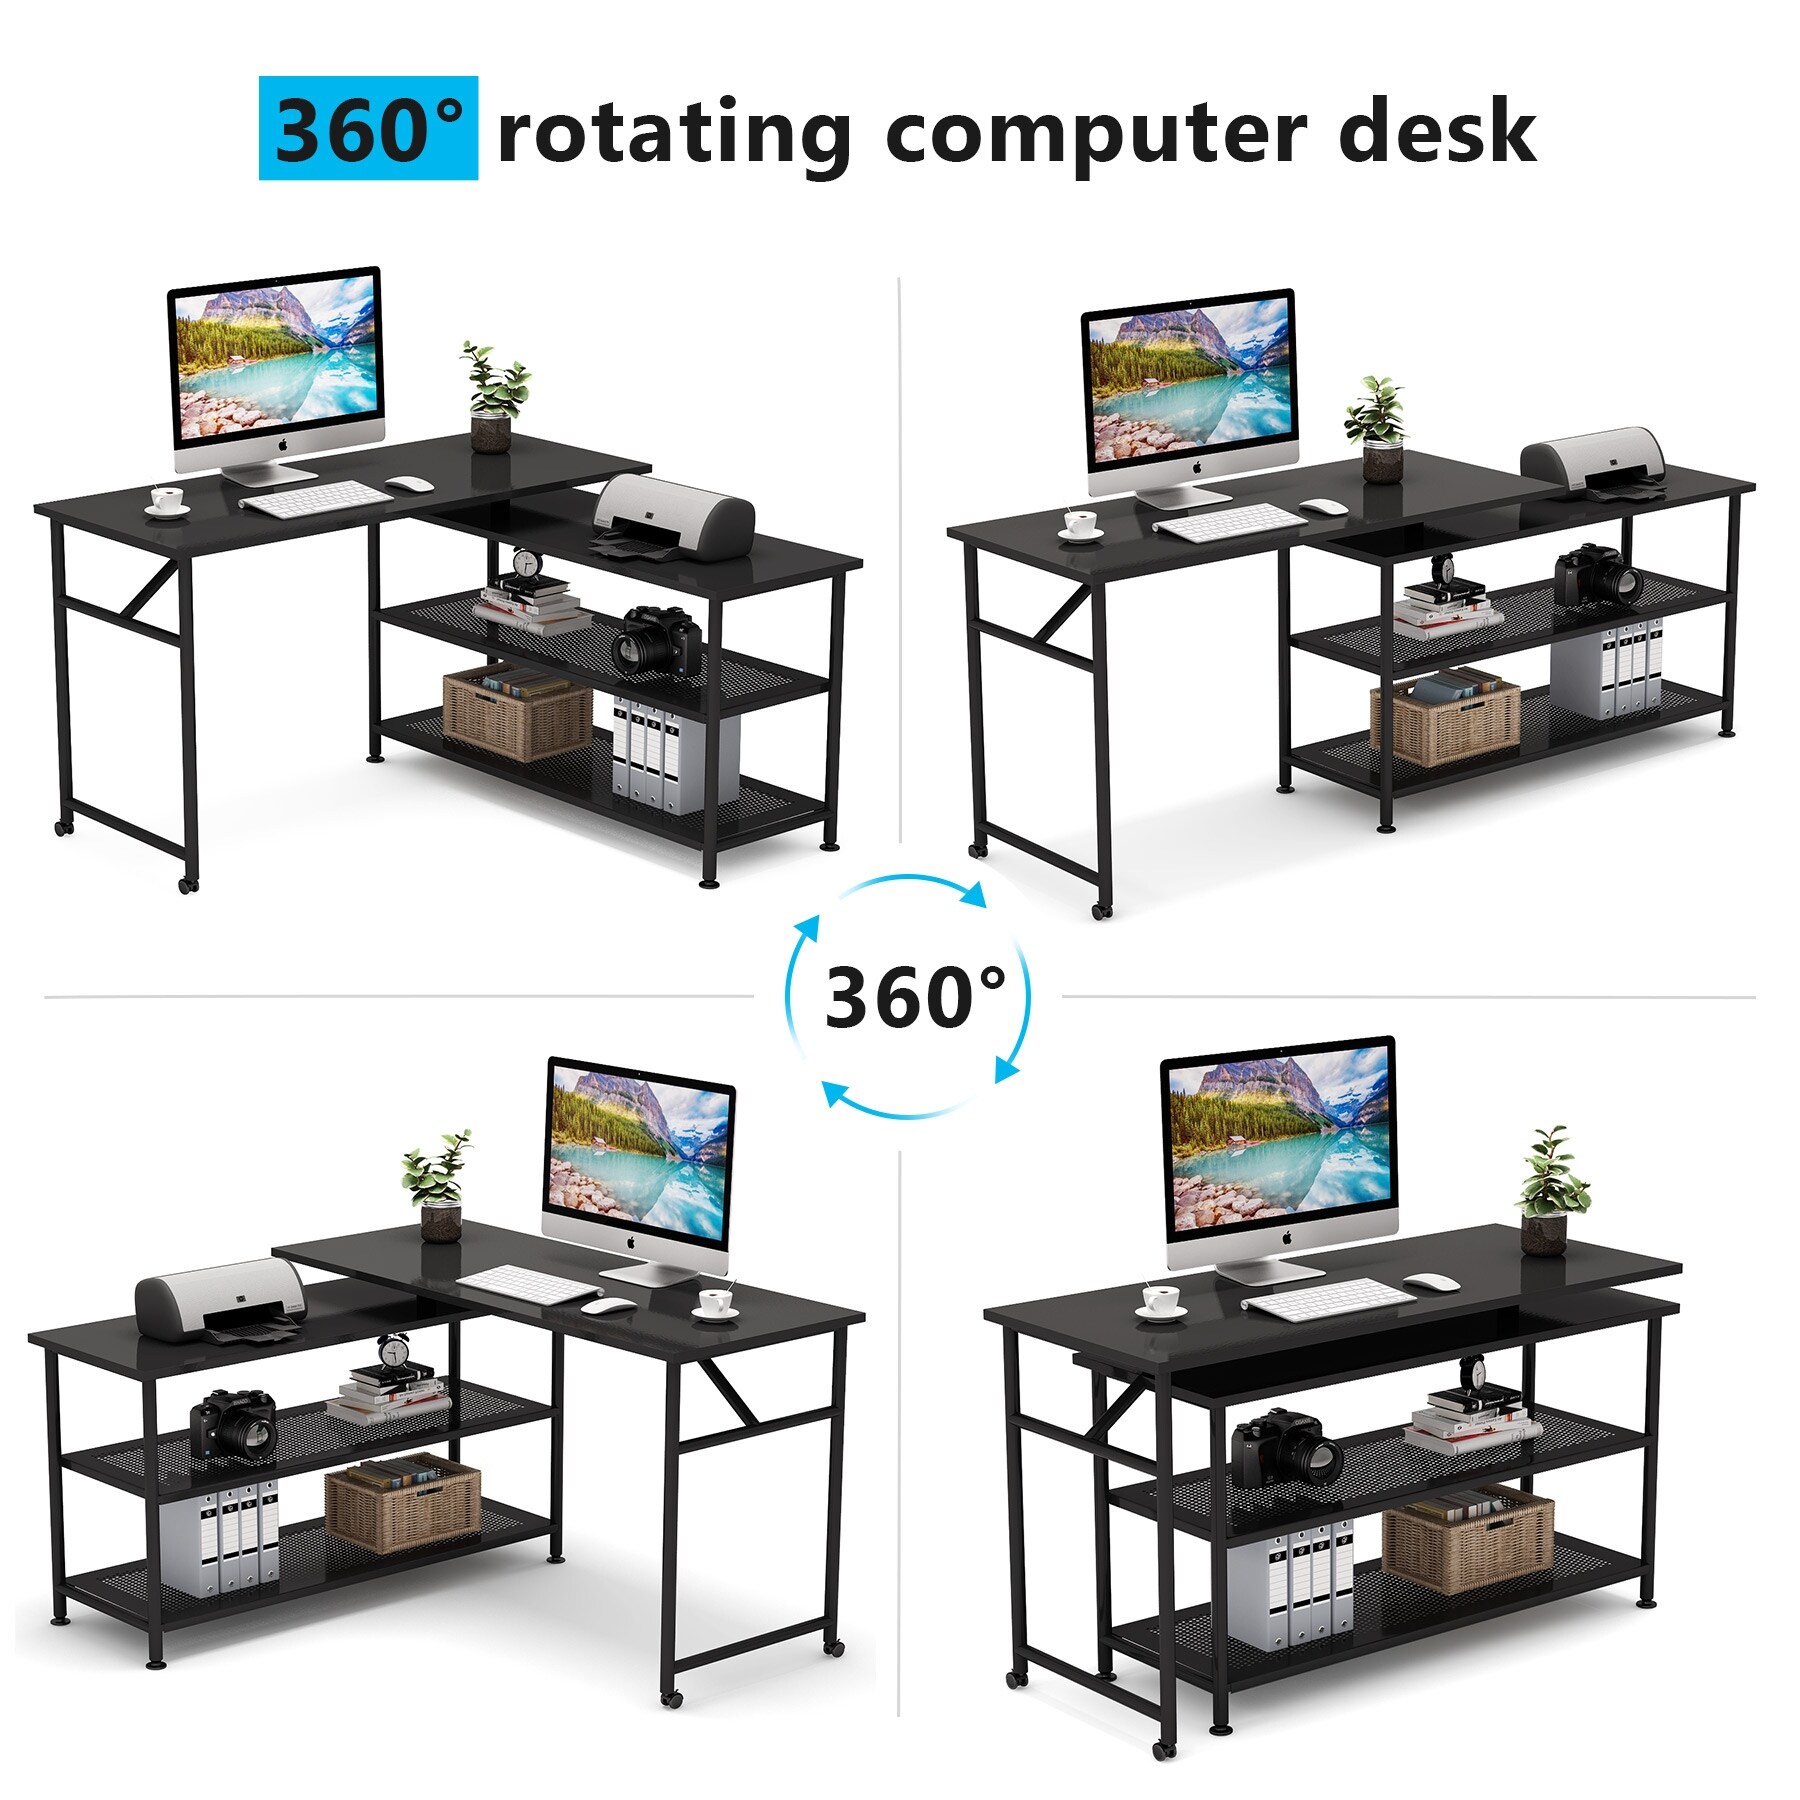 https://ak1.ostkcdn.com/images/products/is/images/direct/b126b754f136e2dee526aaee6b0136932c89cfe3/Folding-Computer-Desk-with-Storage-Shelves%2C-360-Rotating-L-Shape-Corner-Desk%2C-Large-PC-Gaming-Desk-for-Home-Office-Small-Space.jpg